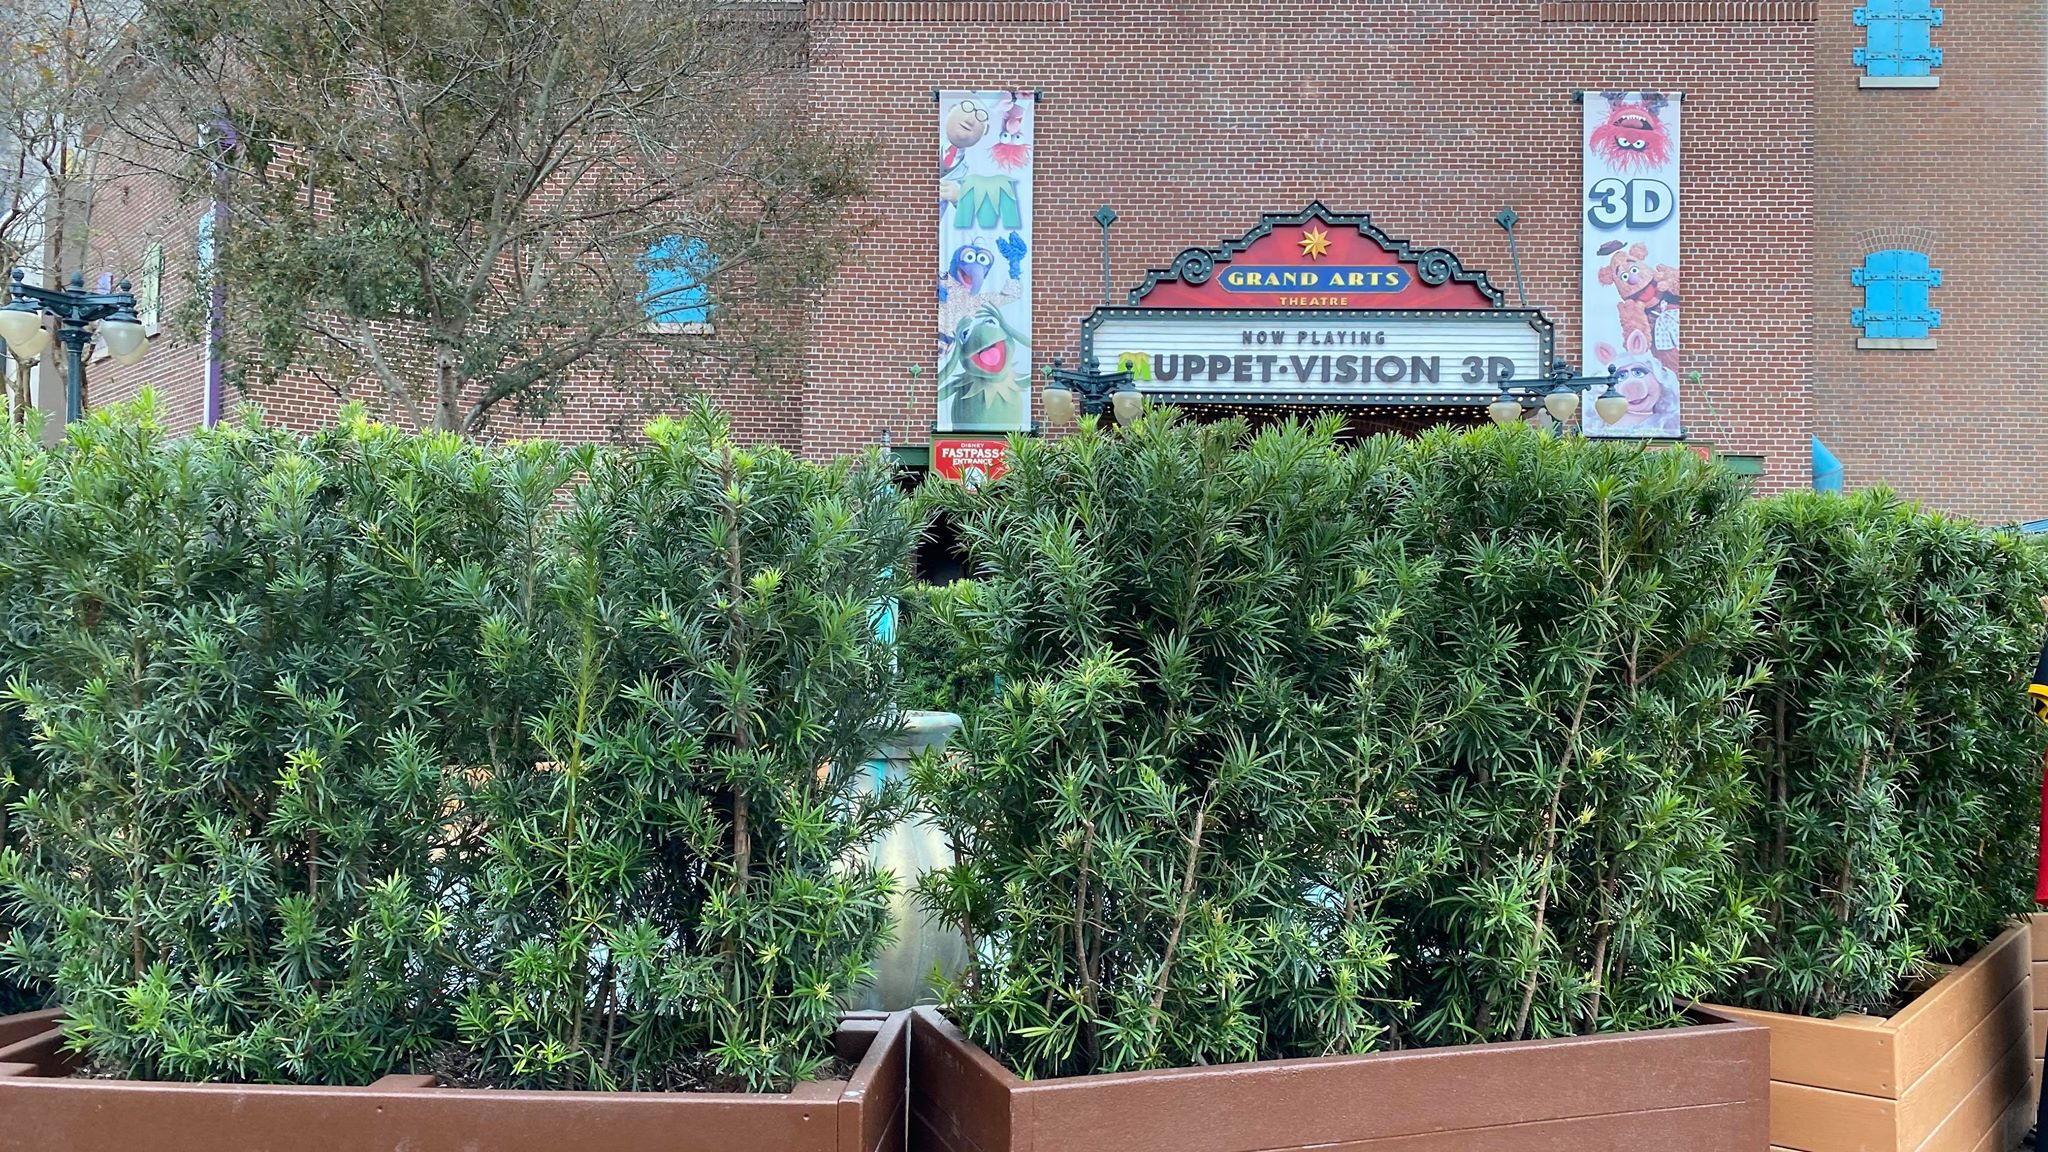 The Muppet Fountain is Missing From Disney’s Hollywood Studios